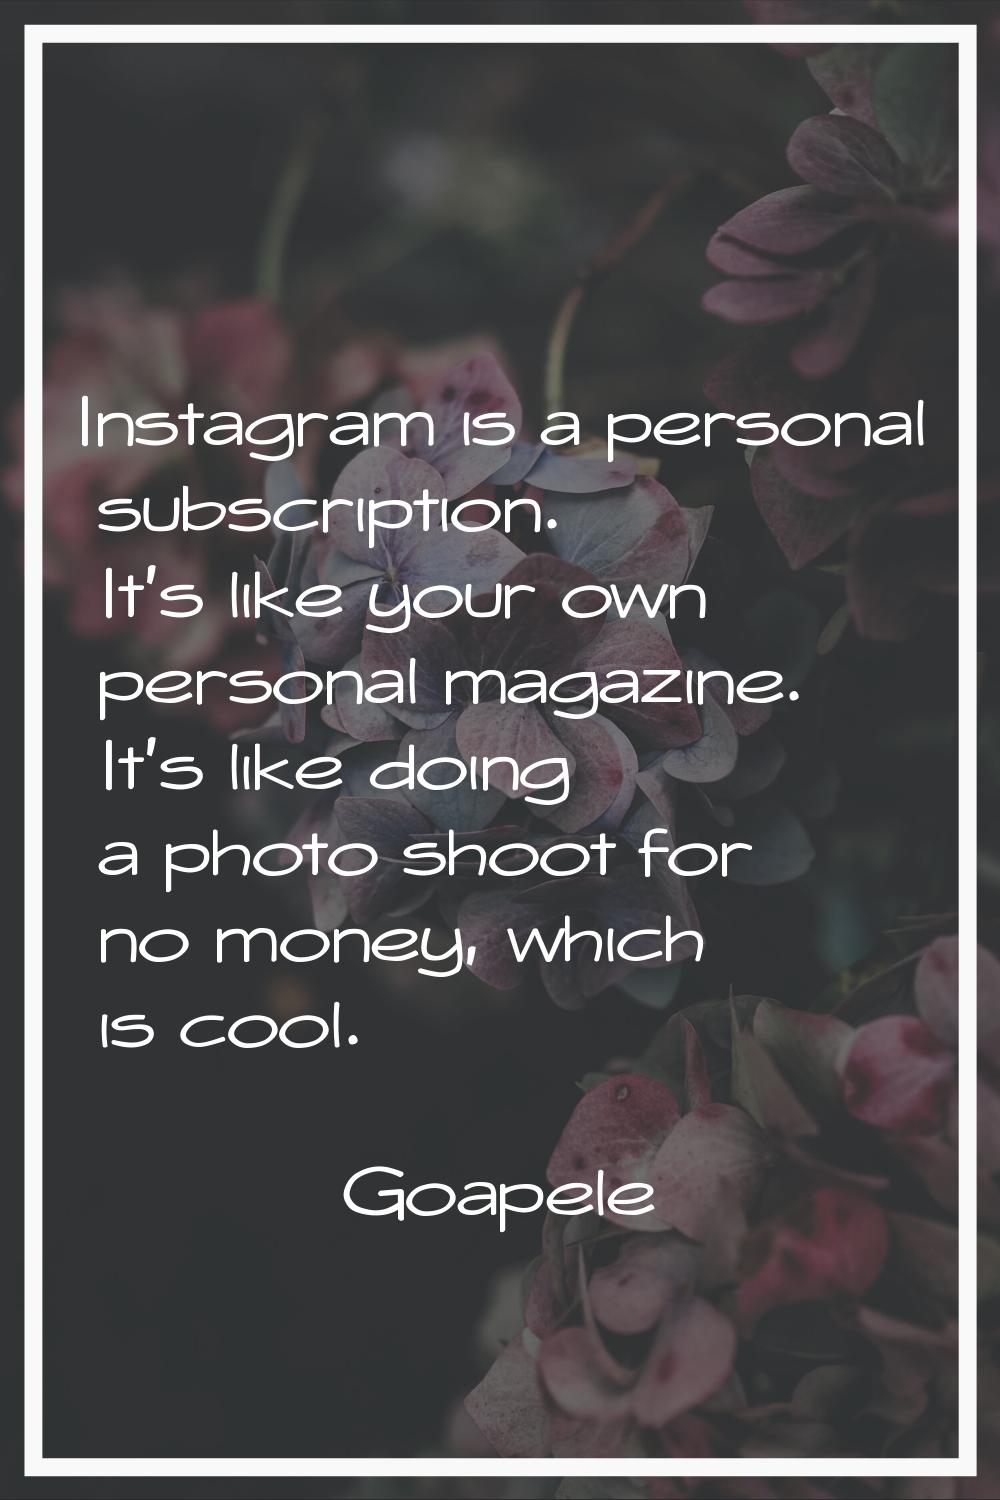 Instagram is a personal subscription. It's like your own personal magazine. It's like doing a photo